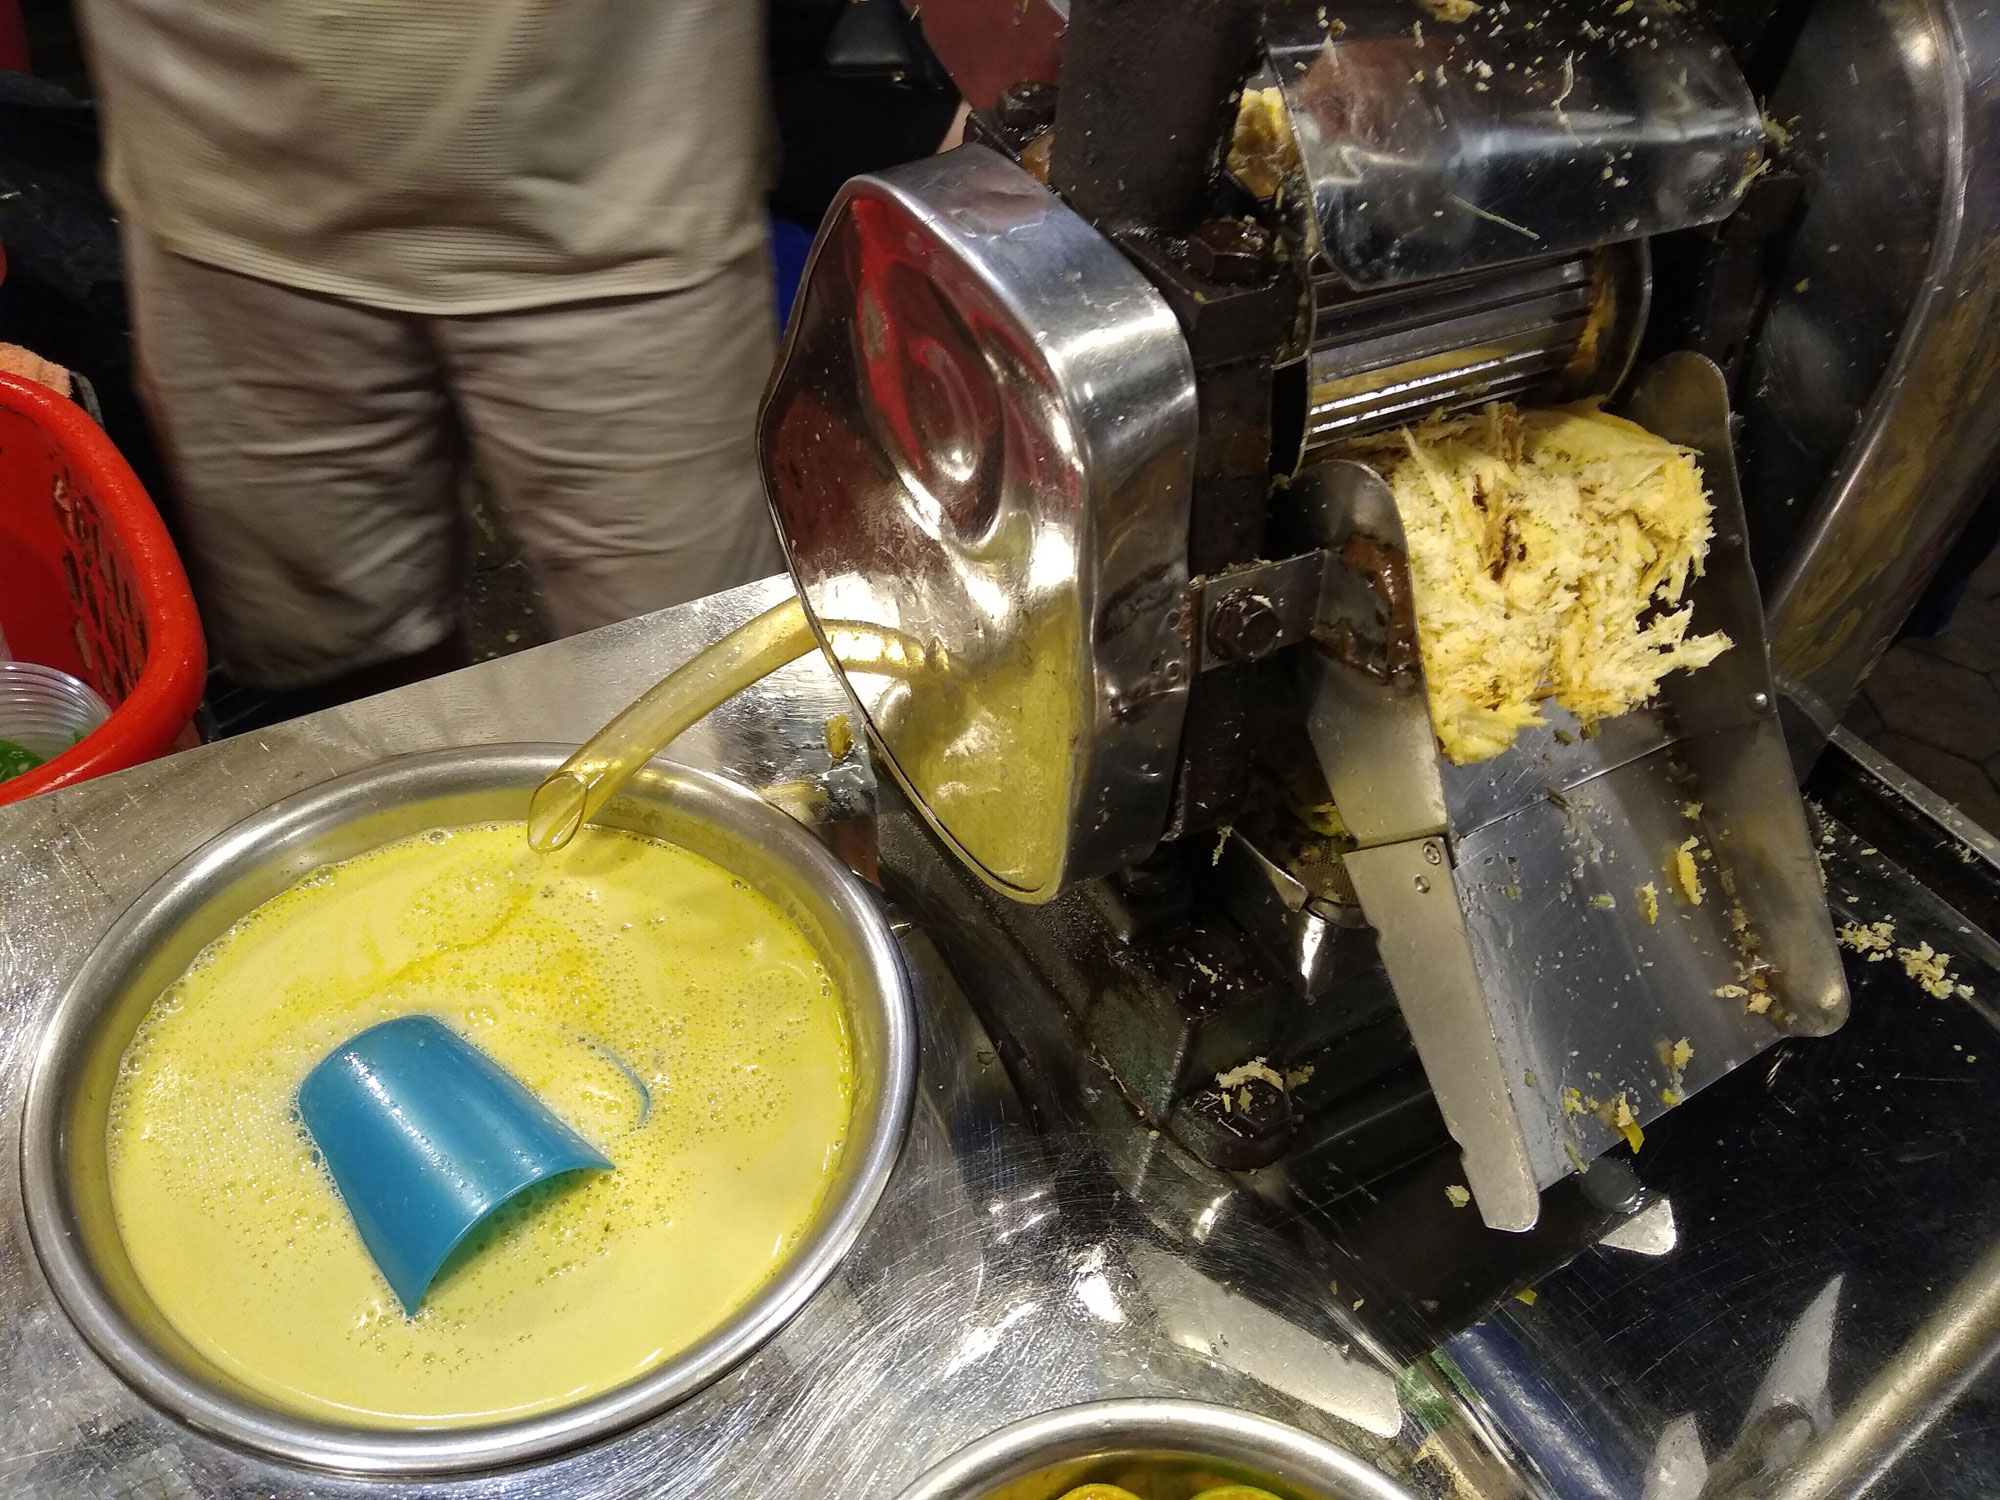 Photograph of fresh sugarcane juice is a stainless steel bowl at a night market in Cambodia. The photo shows an opaque yellowish liquid in a bowl with a blue mug sitting on its side in the liquid. A grinder is next to the bowl of liquid.